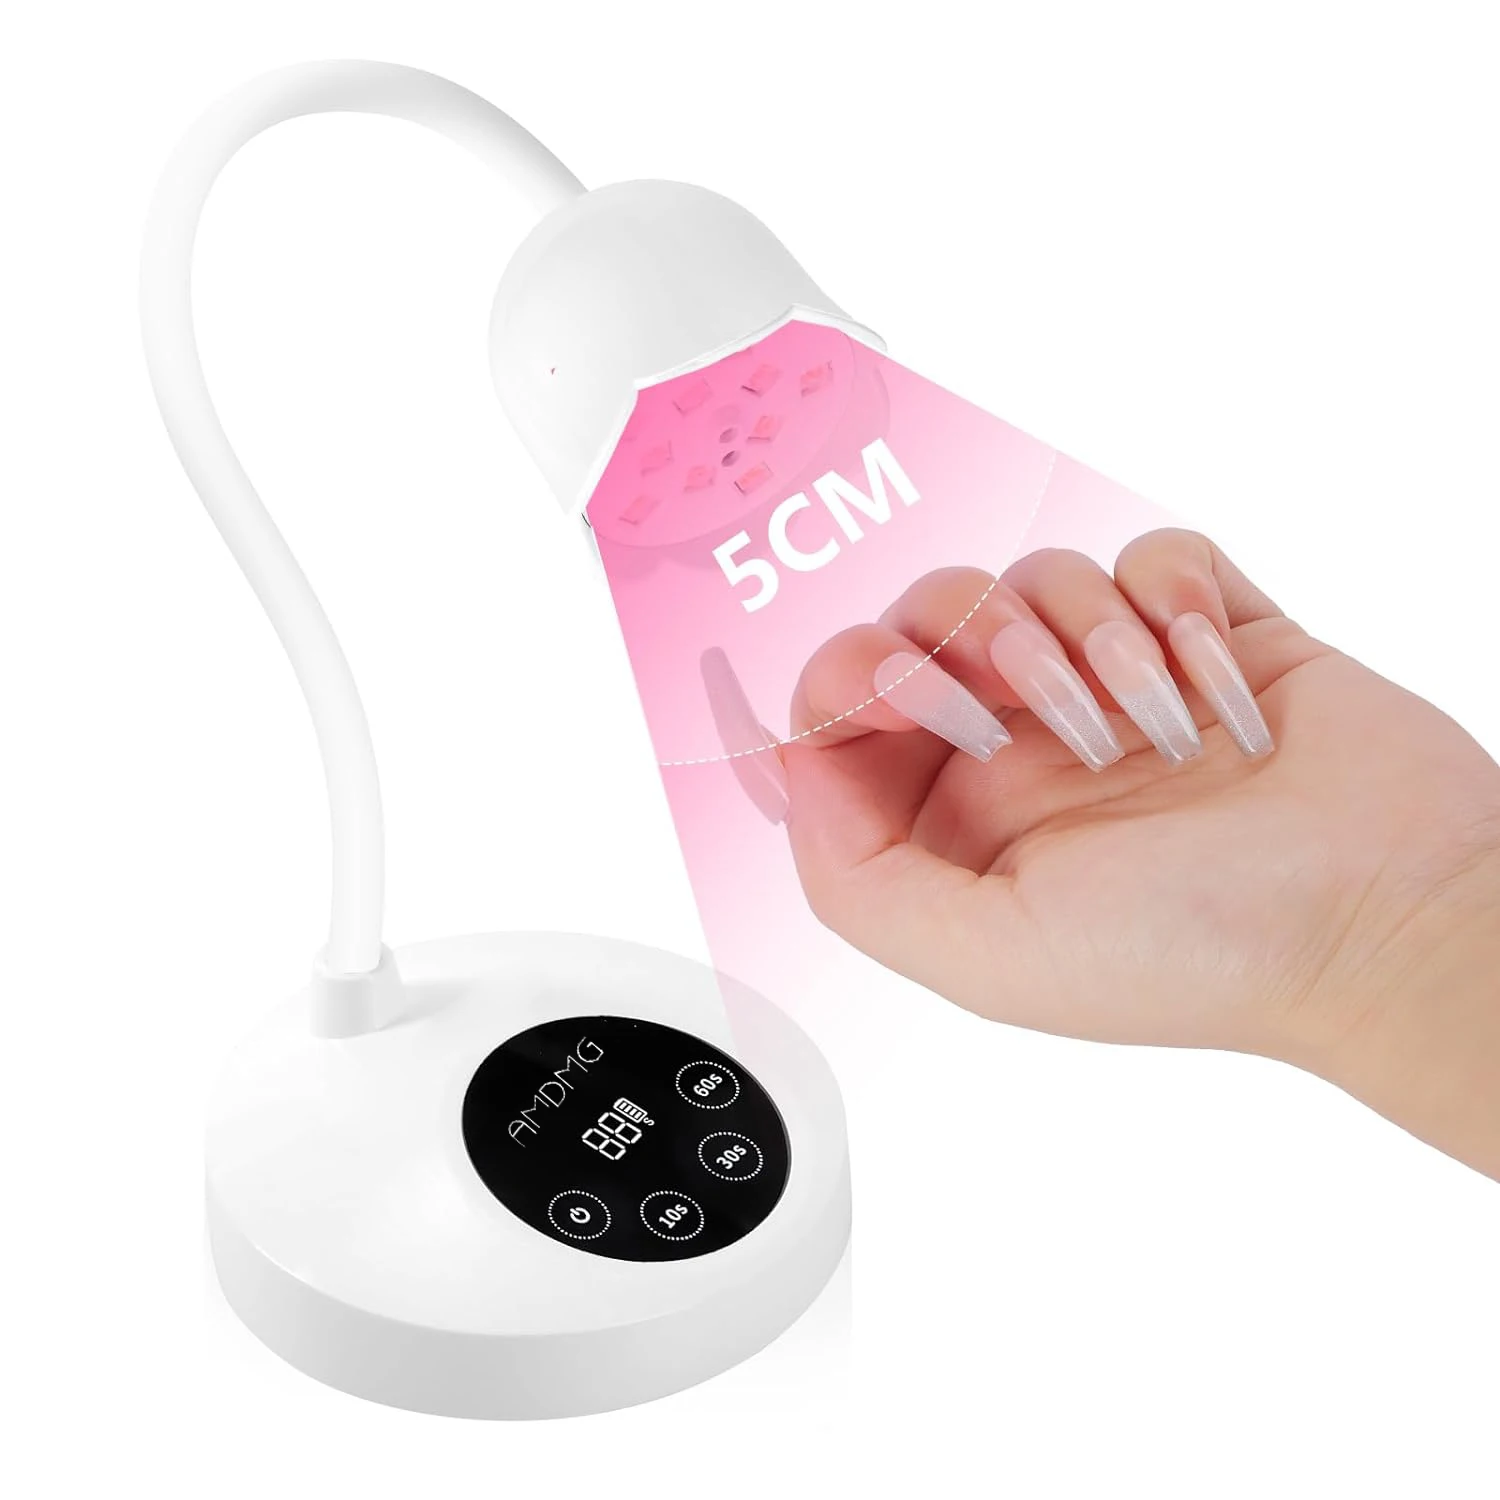 

Rechargeable Mini UV Nail Lamp LED UV Light Dryer for Nails Gel Polish 4 Timers Fast Curing UV Lamp for Home DIY Manicure